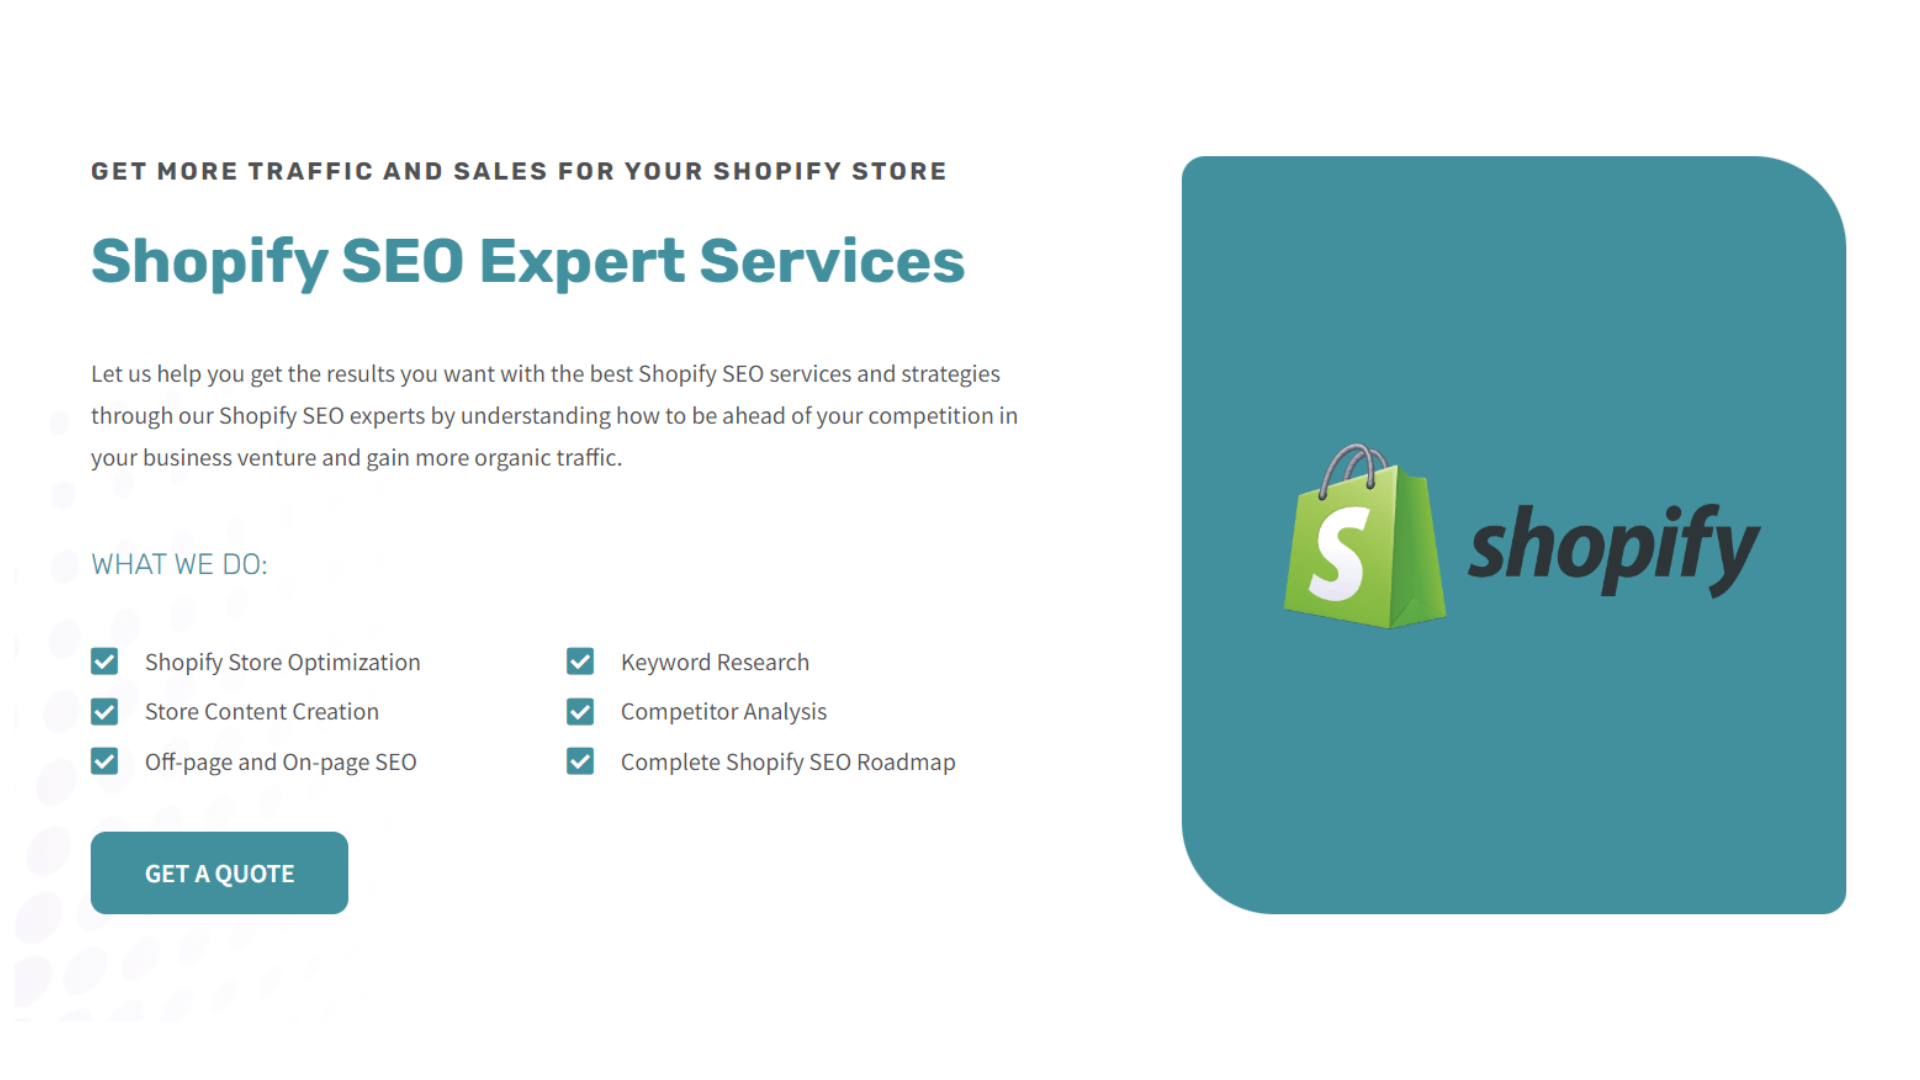 Shopify Seo Services How To Dominate Your Ecommerce Sales With Shopify Seo Services?